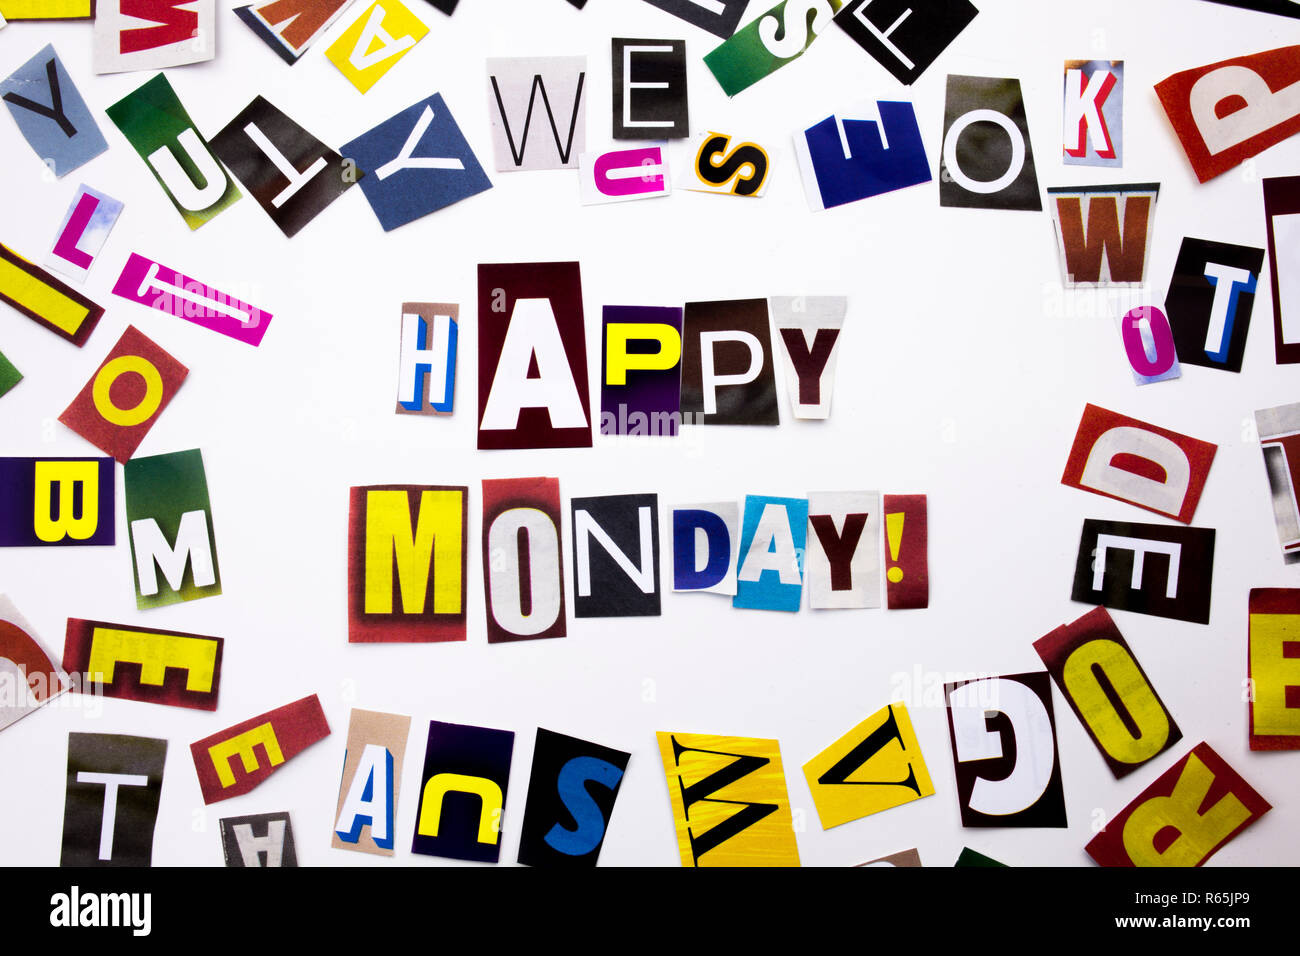 A word writing text showing concept of Happy Monday made of different magazine newspaper letter for Business case on the white background with copy space Stock Photo